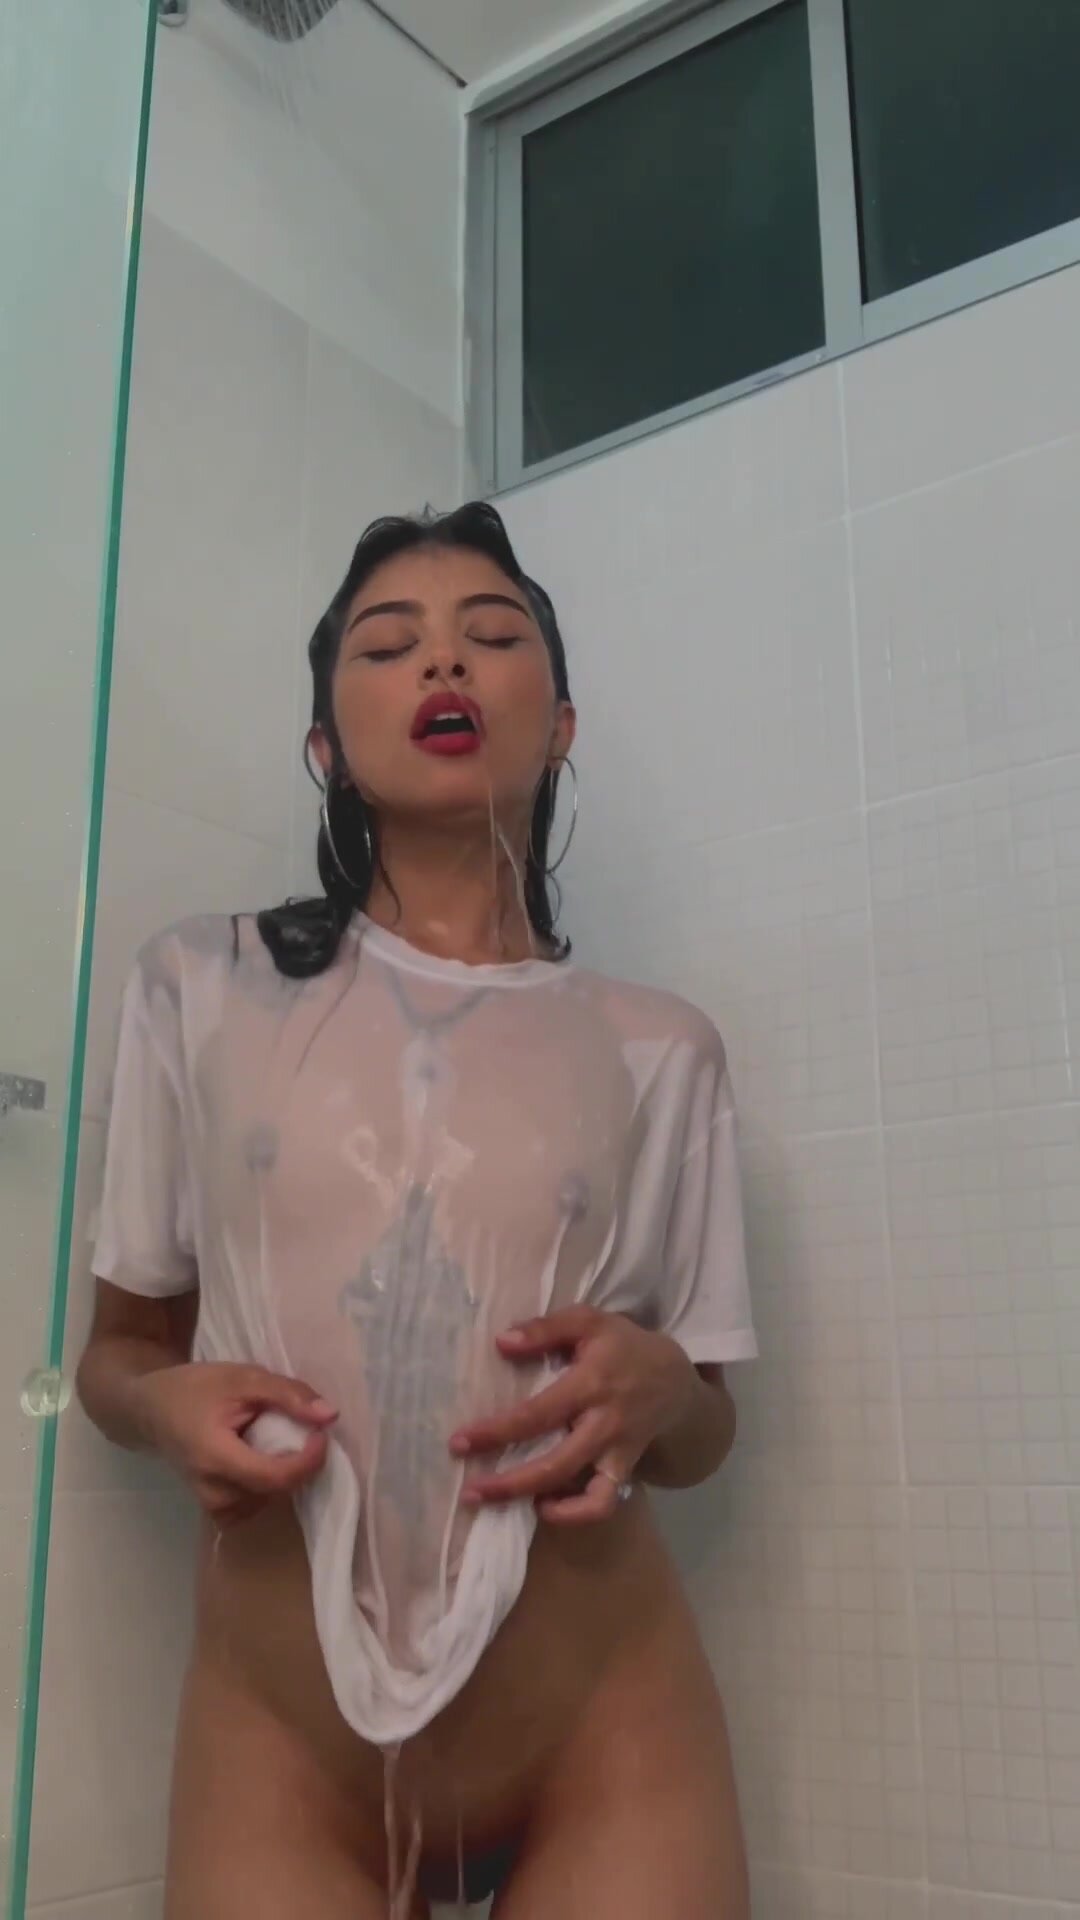 If you have never fucked a tattooed girl in the shower, this is your chance